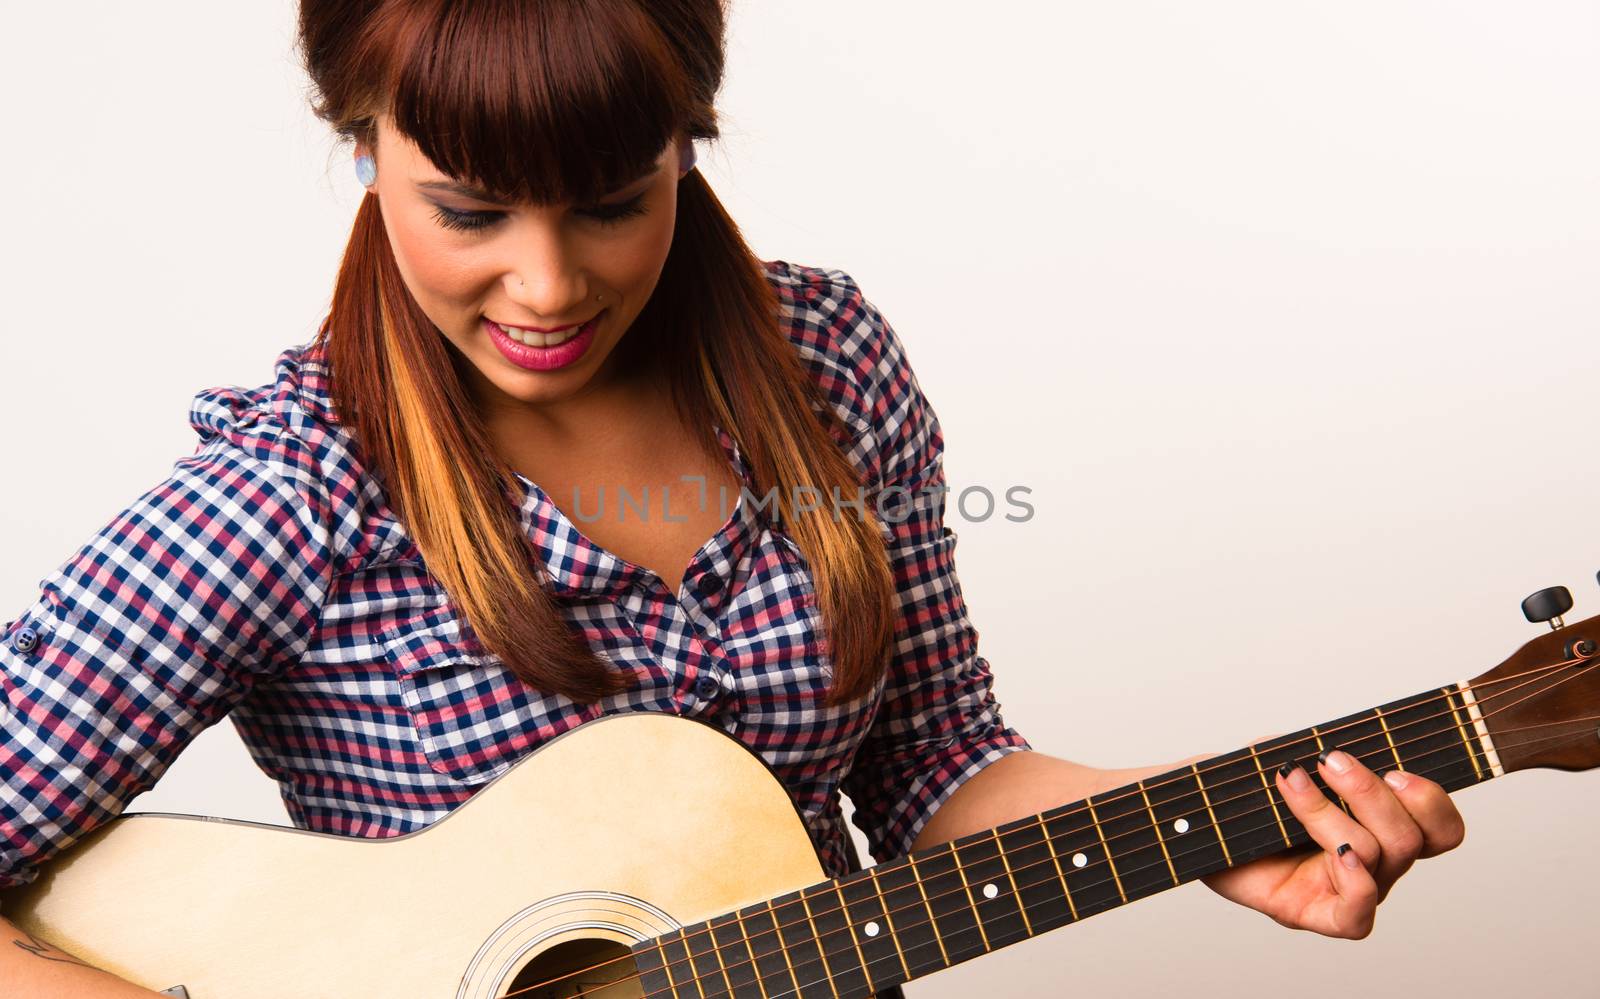 Attractive Woman Torso Holding Playing Guitar Acoustic Musician by ChrisBoswell